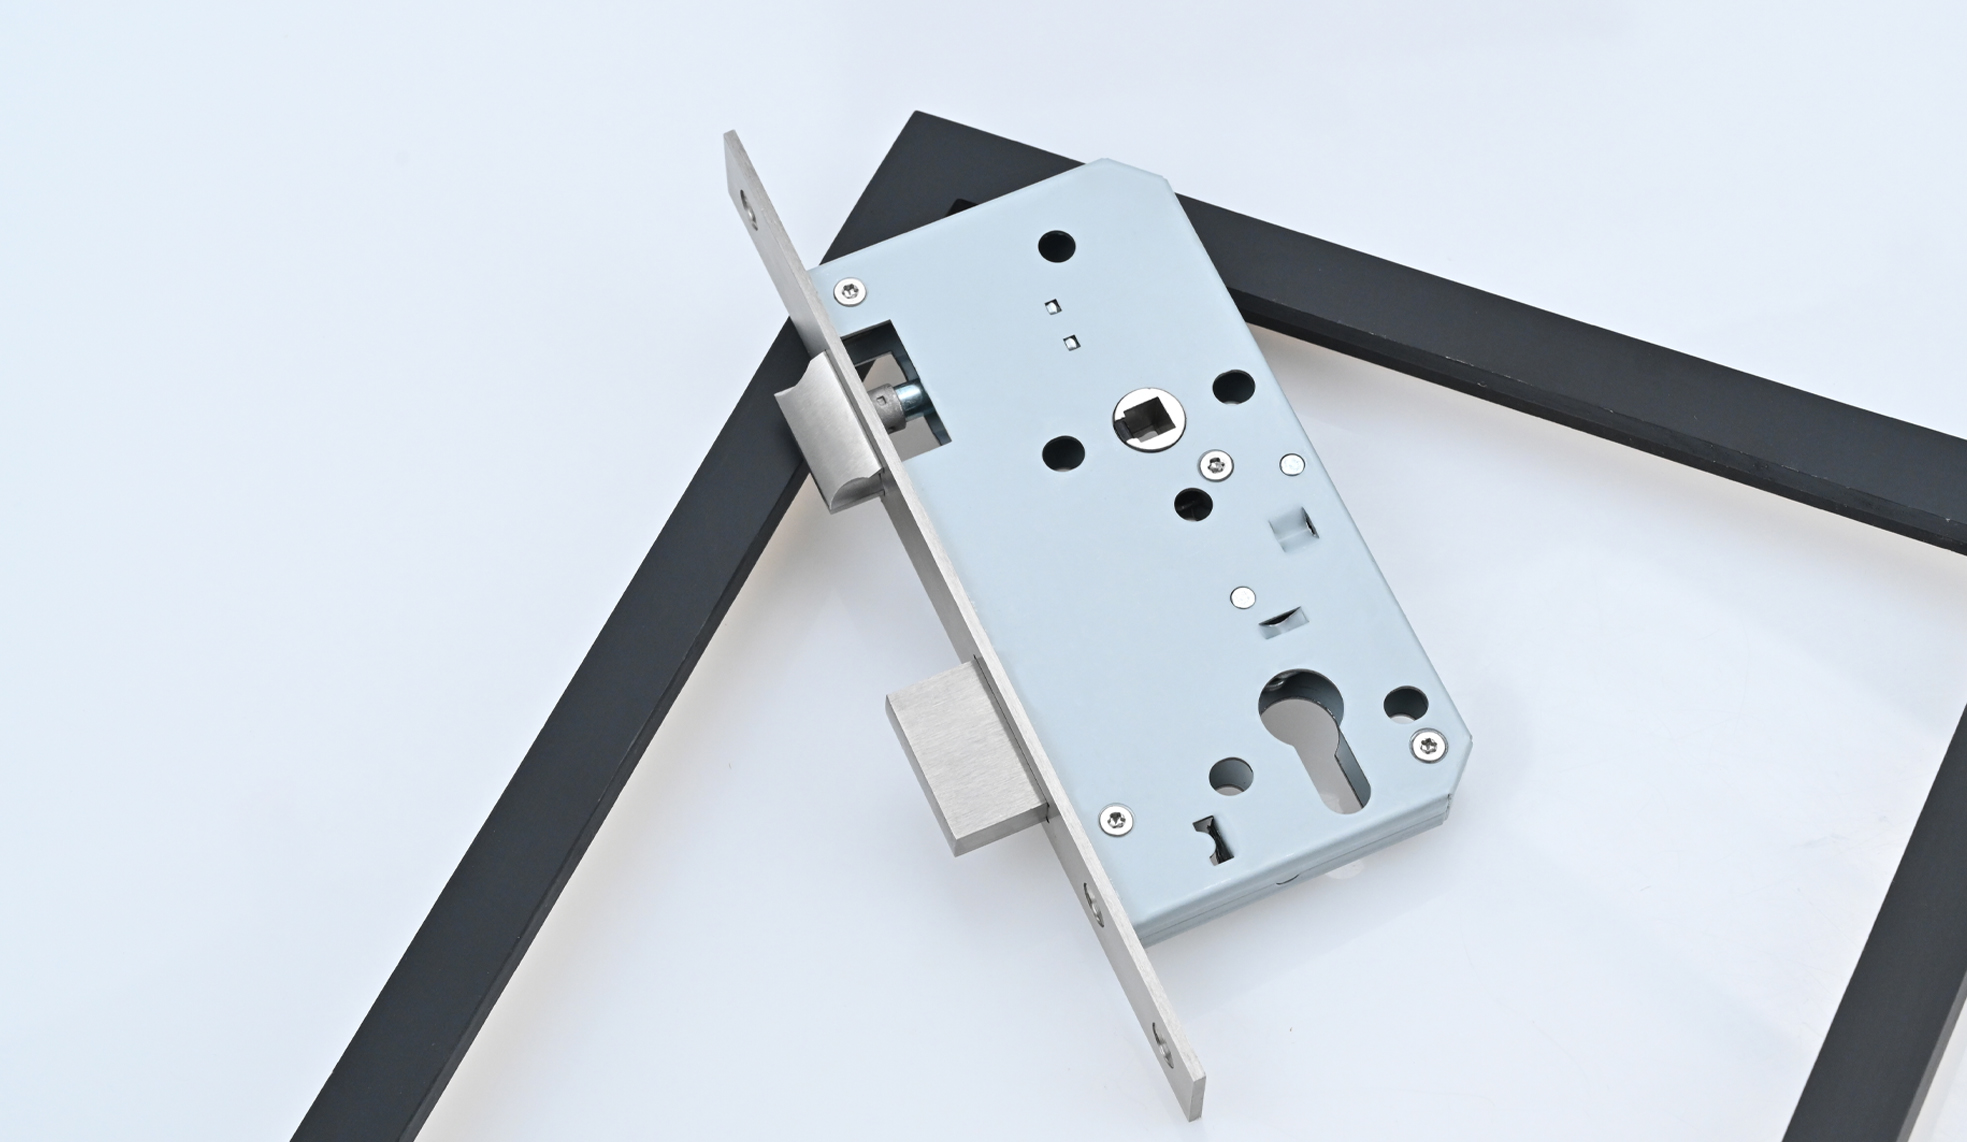 Stainless Steel: The Ideal Material for Fire-Resistant Mortise Locks